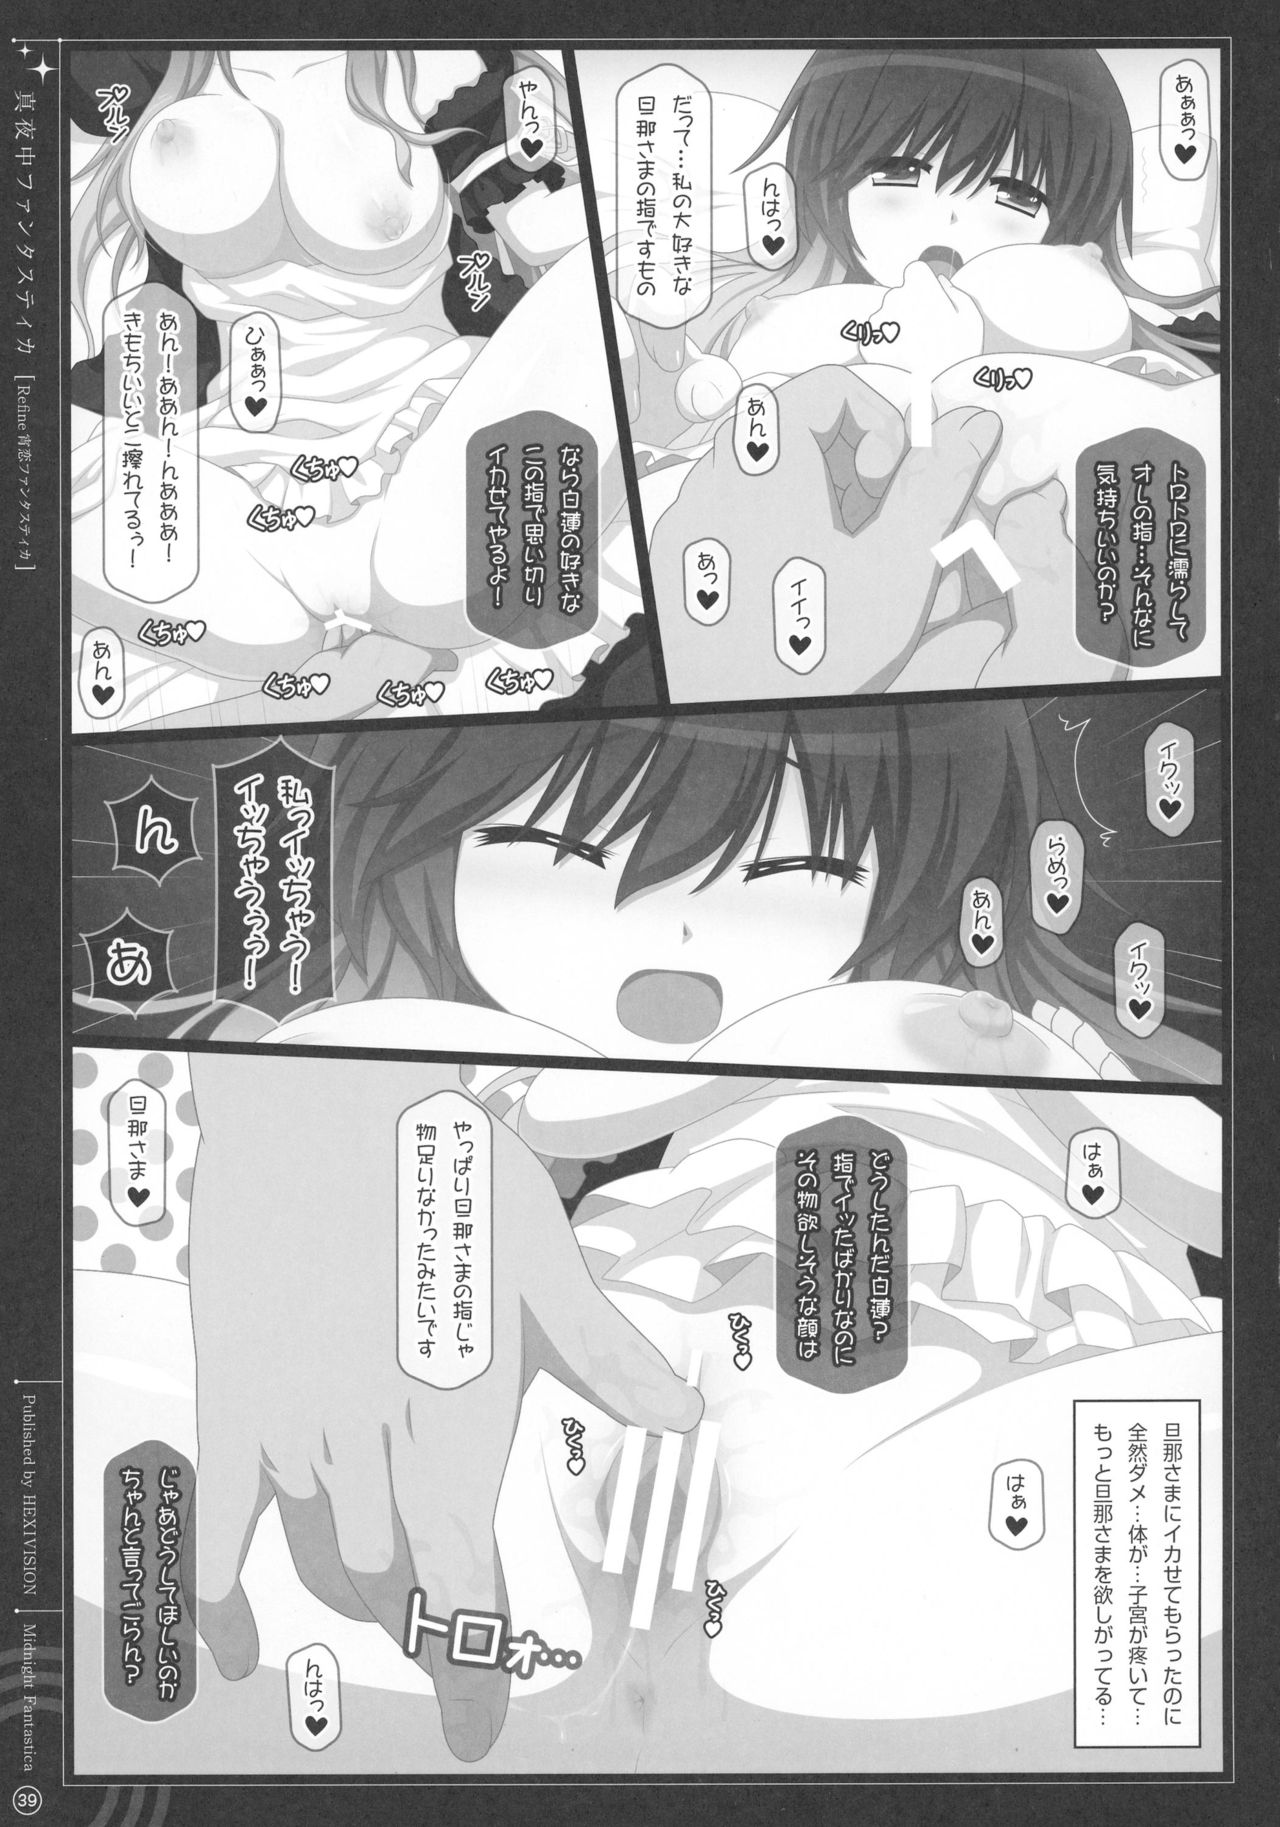 (Reitaisai 13) [HEXIVISION (CPU)] Soushuuhen Love LOVE Fantastica 2 (Touhou Project) page 39 full